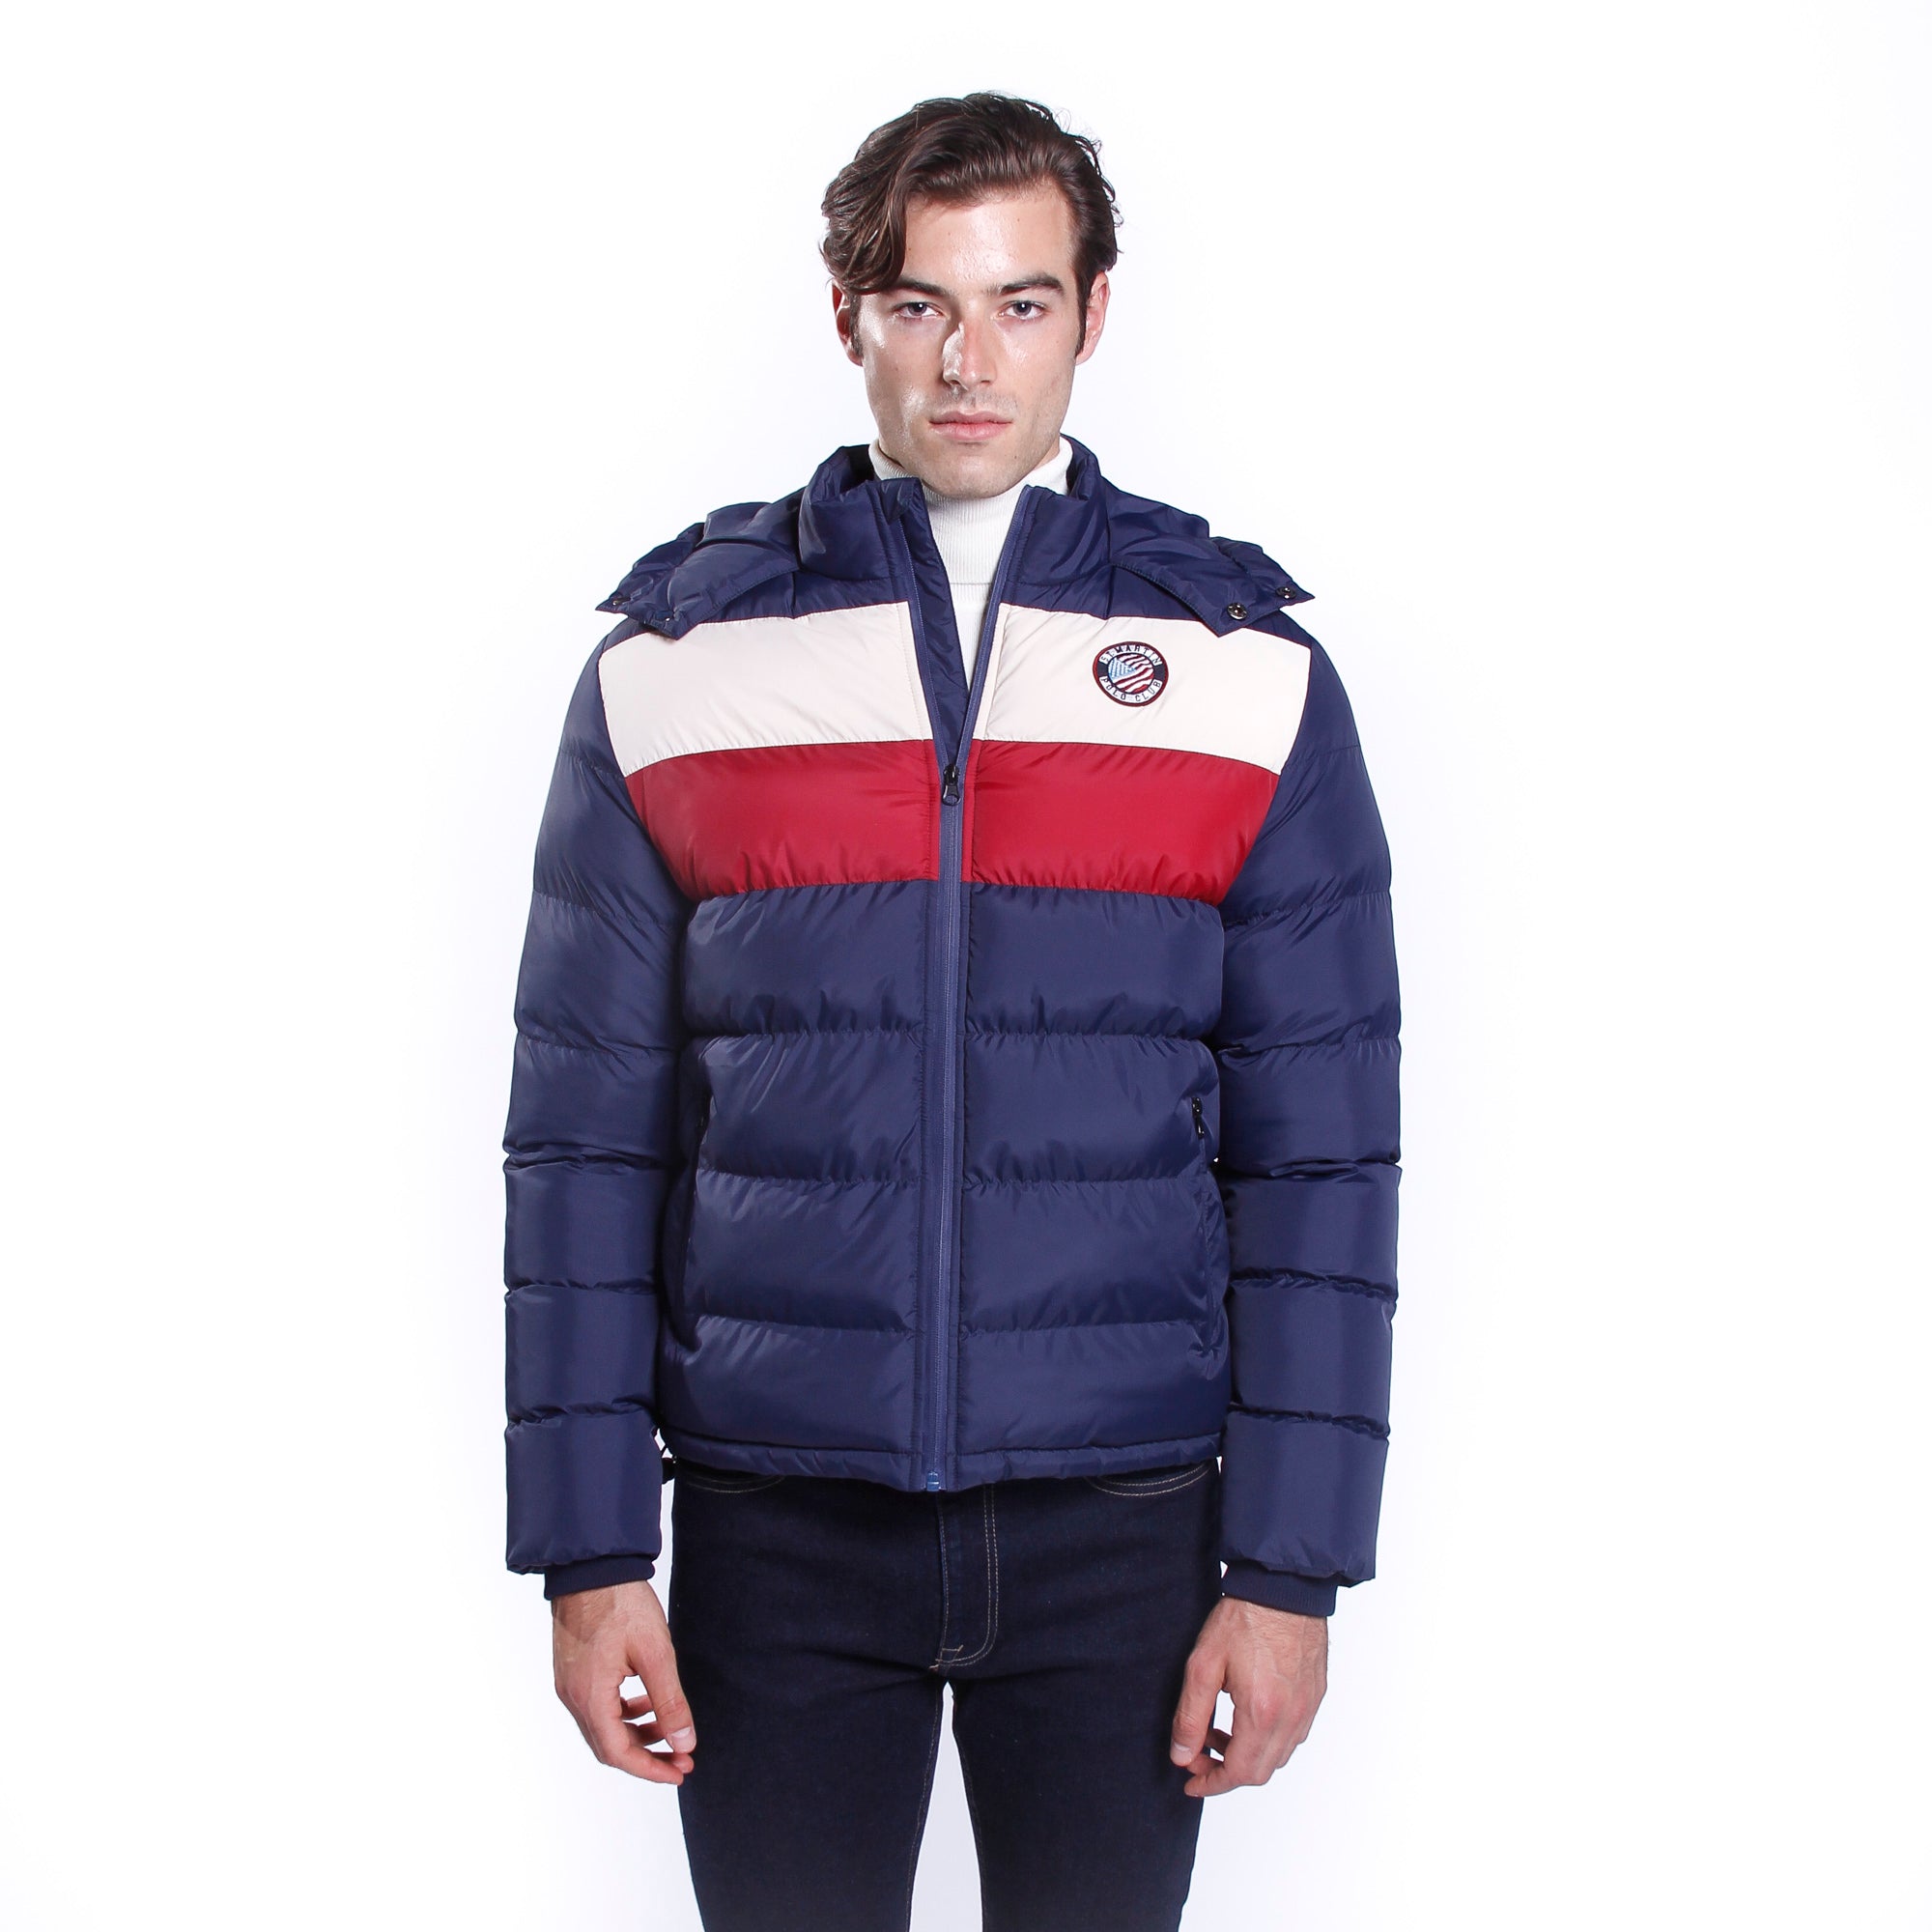 Nylon jacket with hood and colored stripes